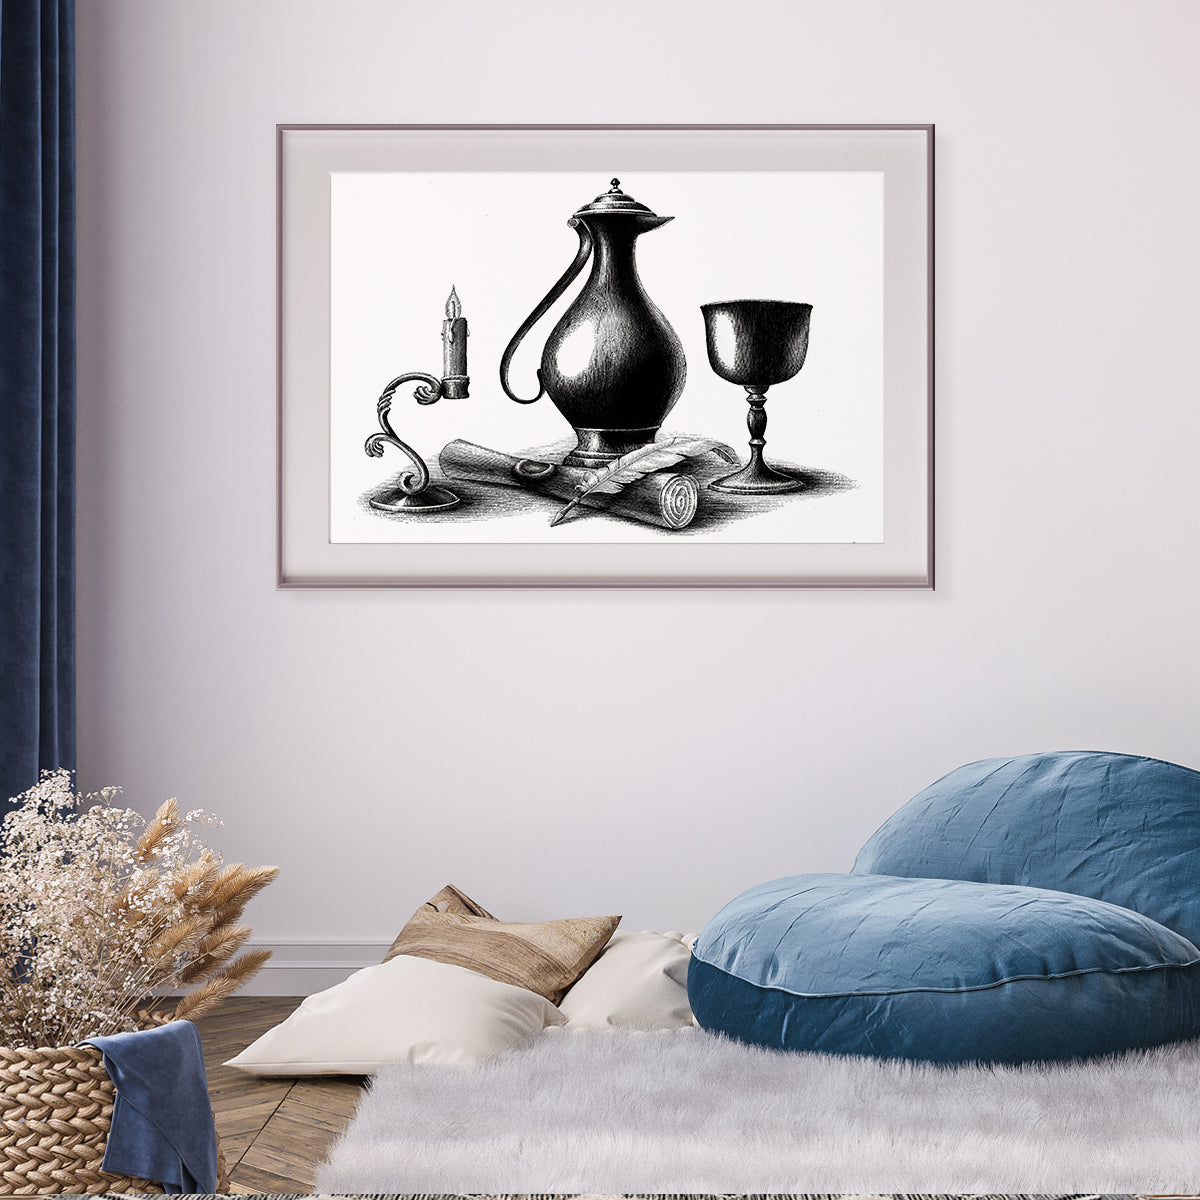 Antique Pitcher Vintage Posters Decoration for Interior-Horizontal Posters NOT FRAMED-CetArt-10″x8″ inches-CetArt